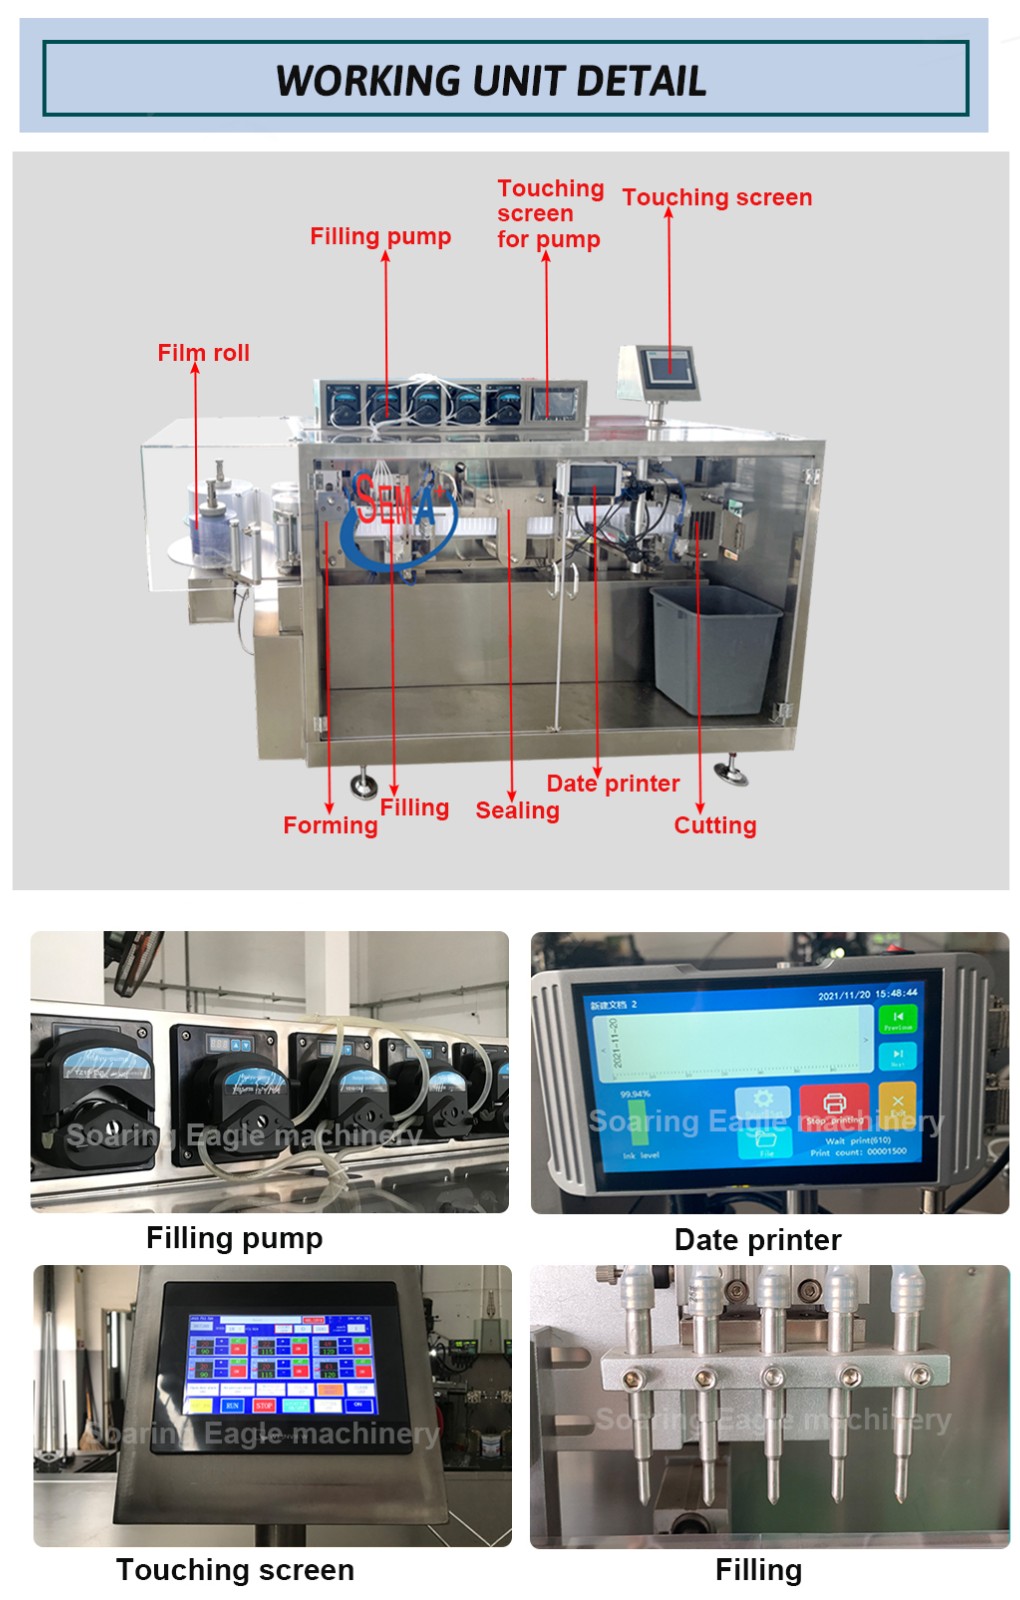 Labeled Liquid Filling Sealing Packaging Machine for Olive Oil